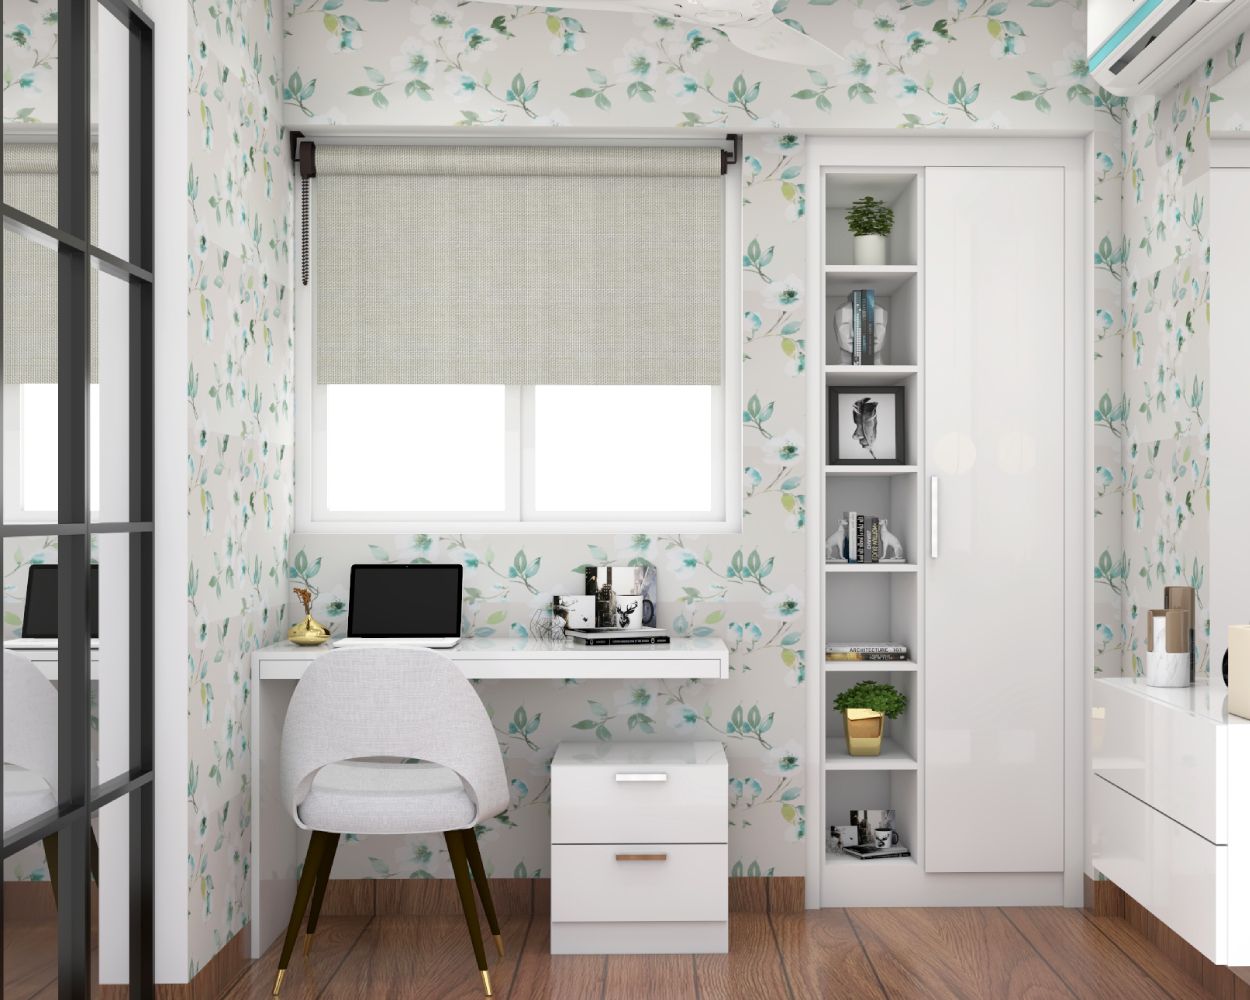 Modern Frosty White Study Room Design With Open And Closed Storage Unit